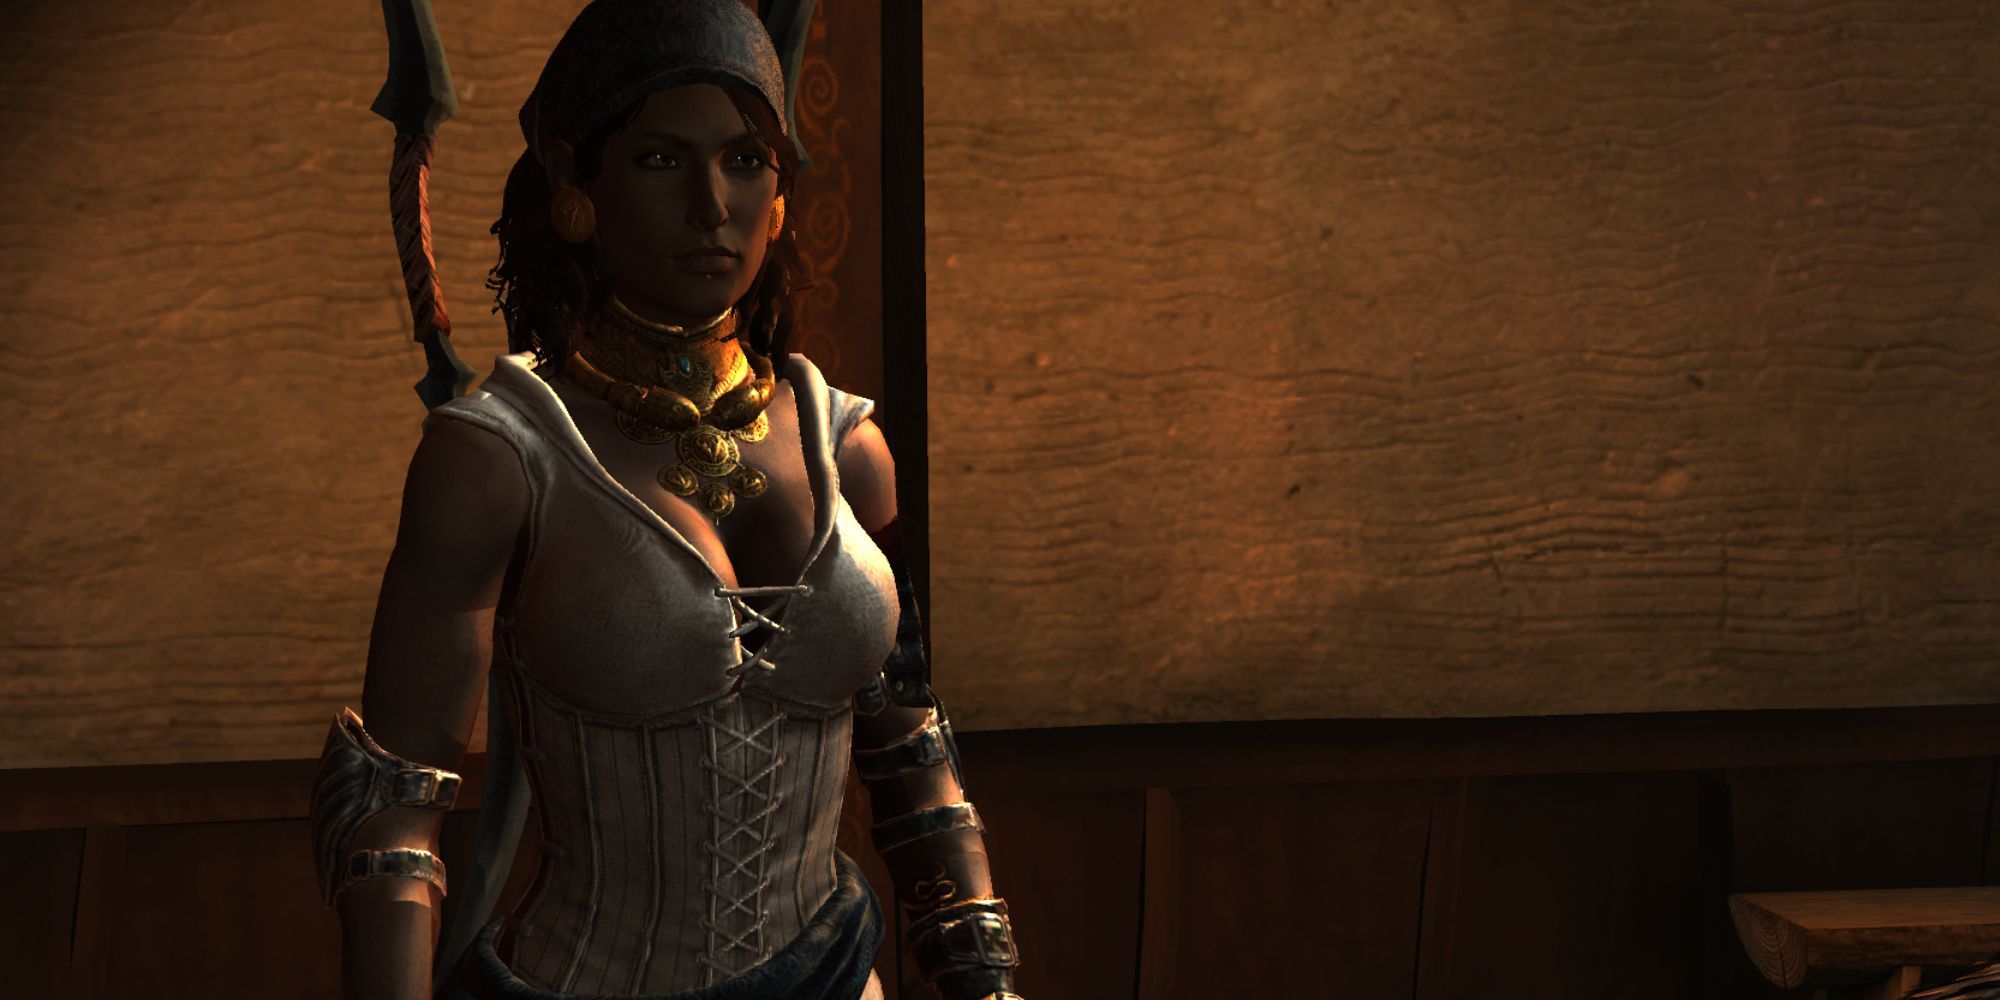 dragon-age-origins-character-face-mod (2)